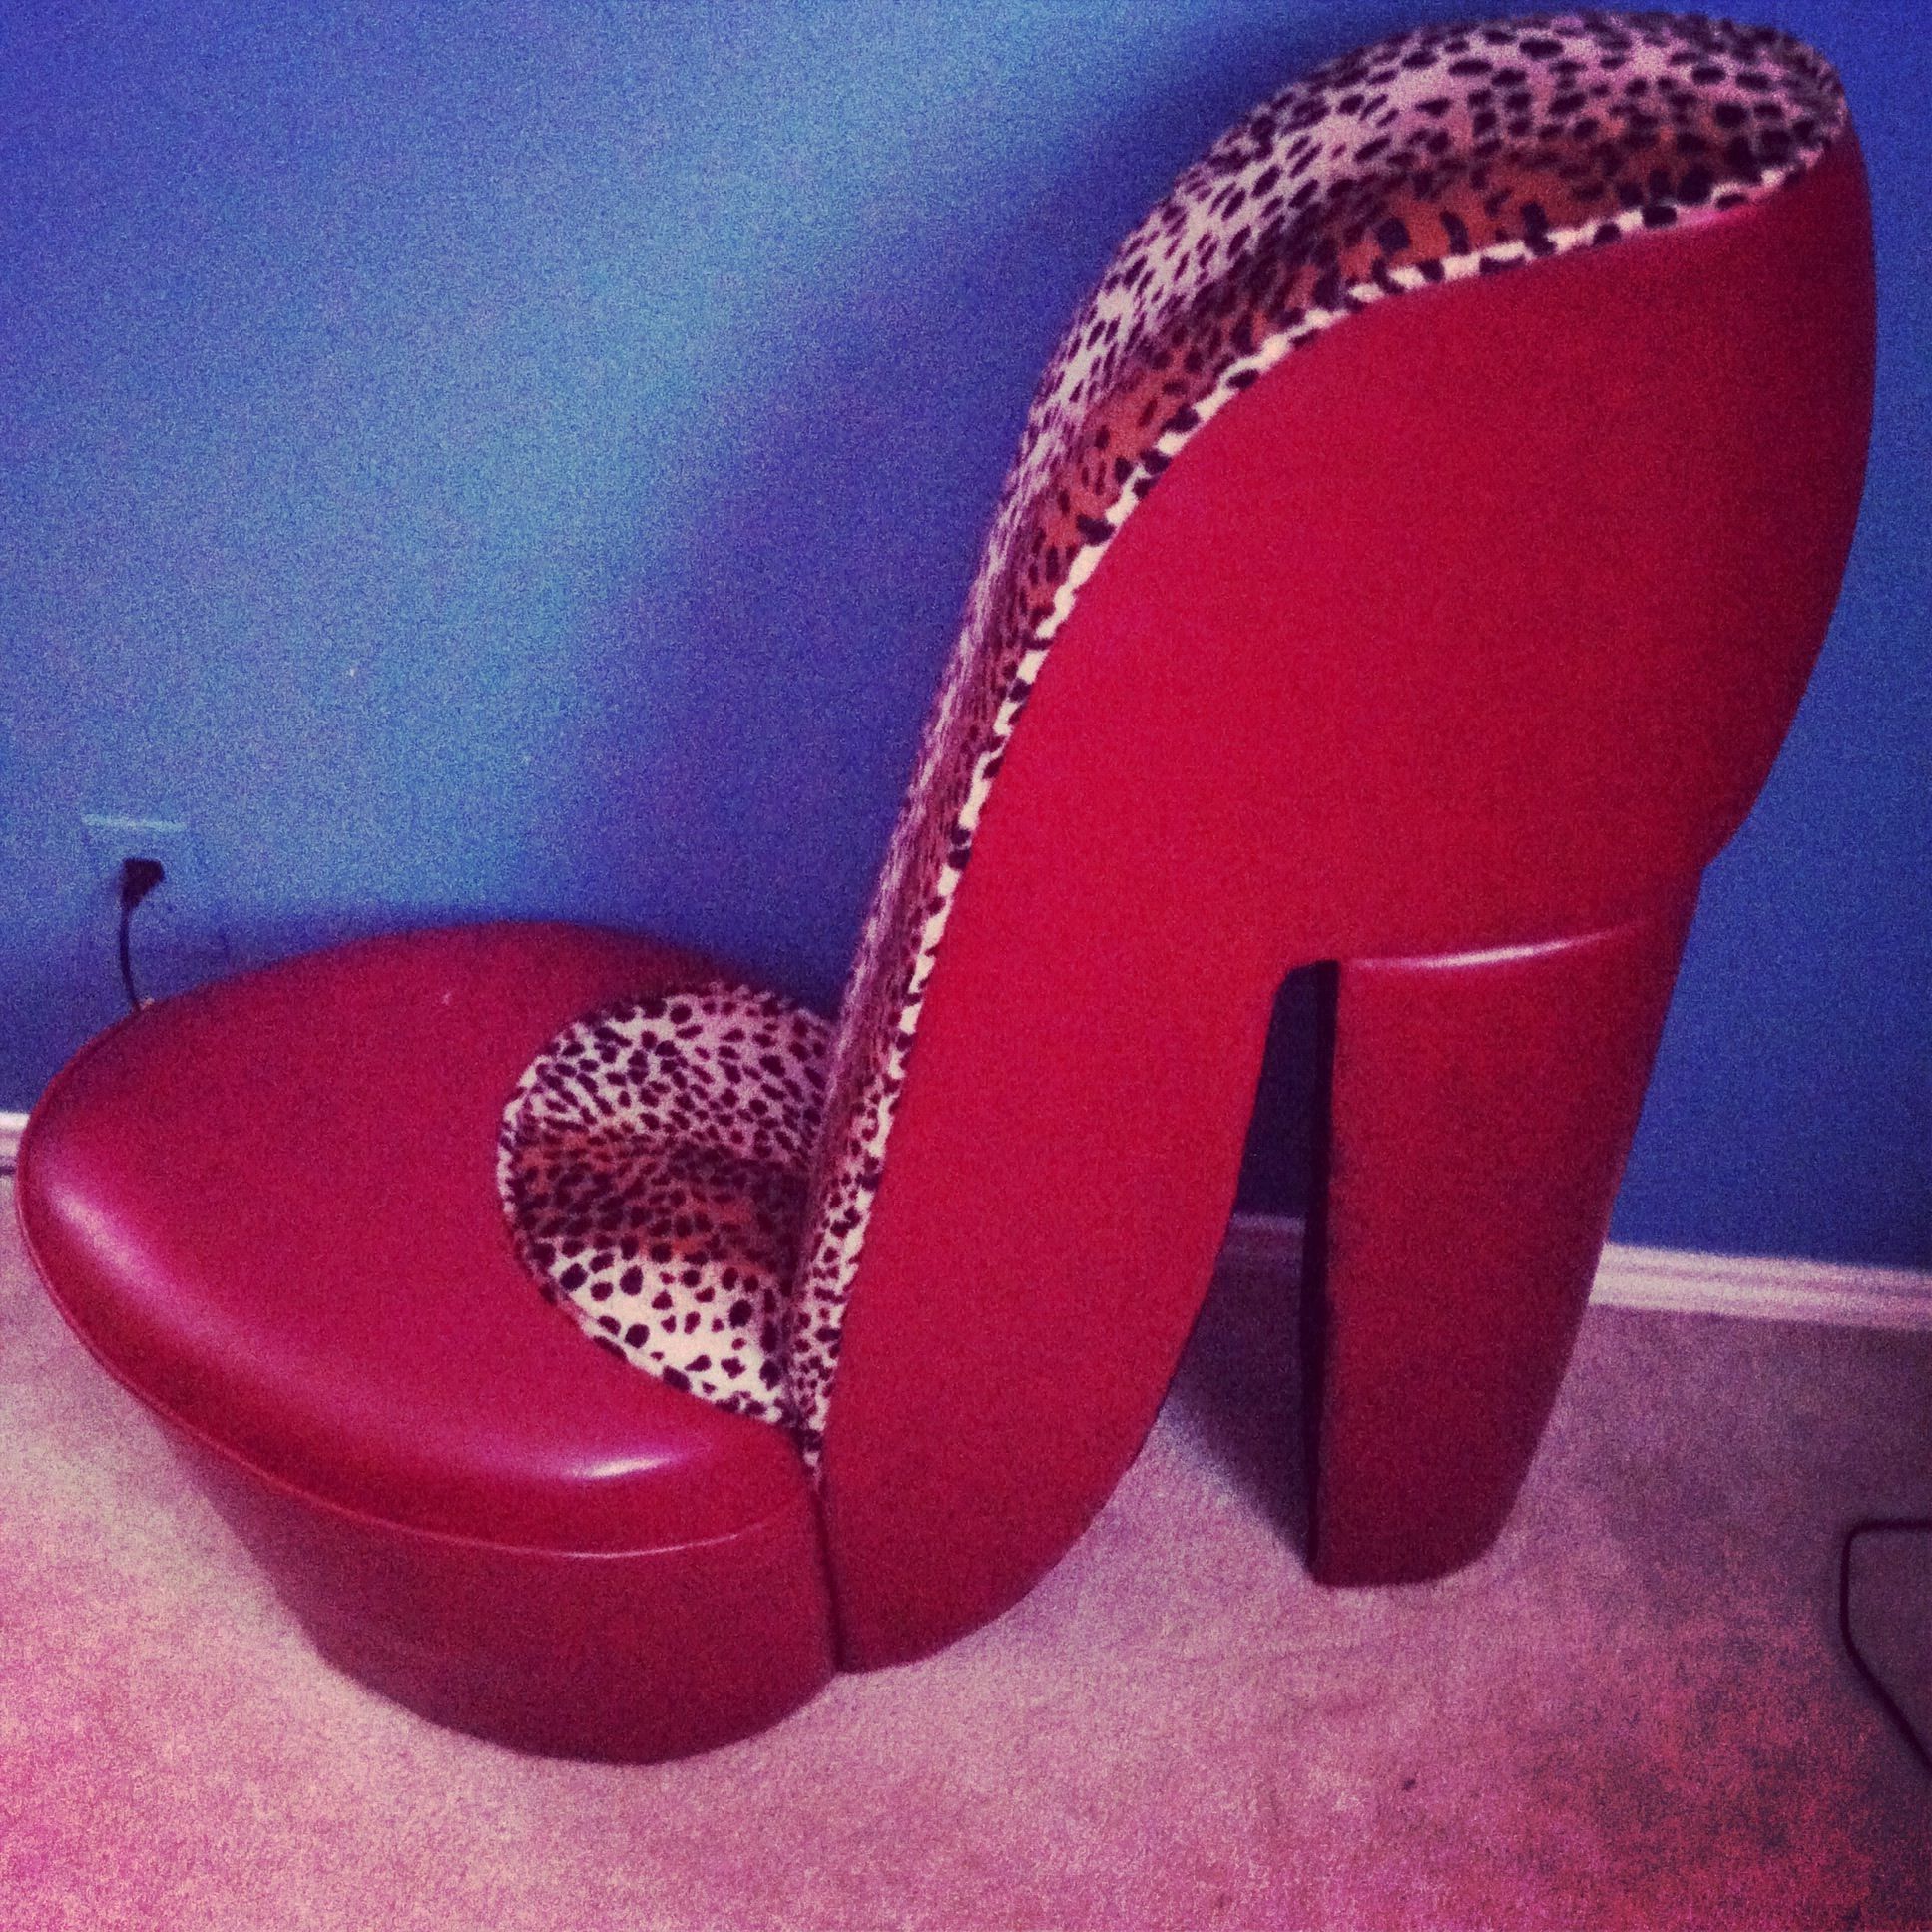 Awesome High Heel Chair Must Have (View 8 of 20)